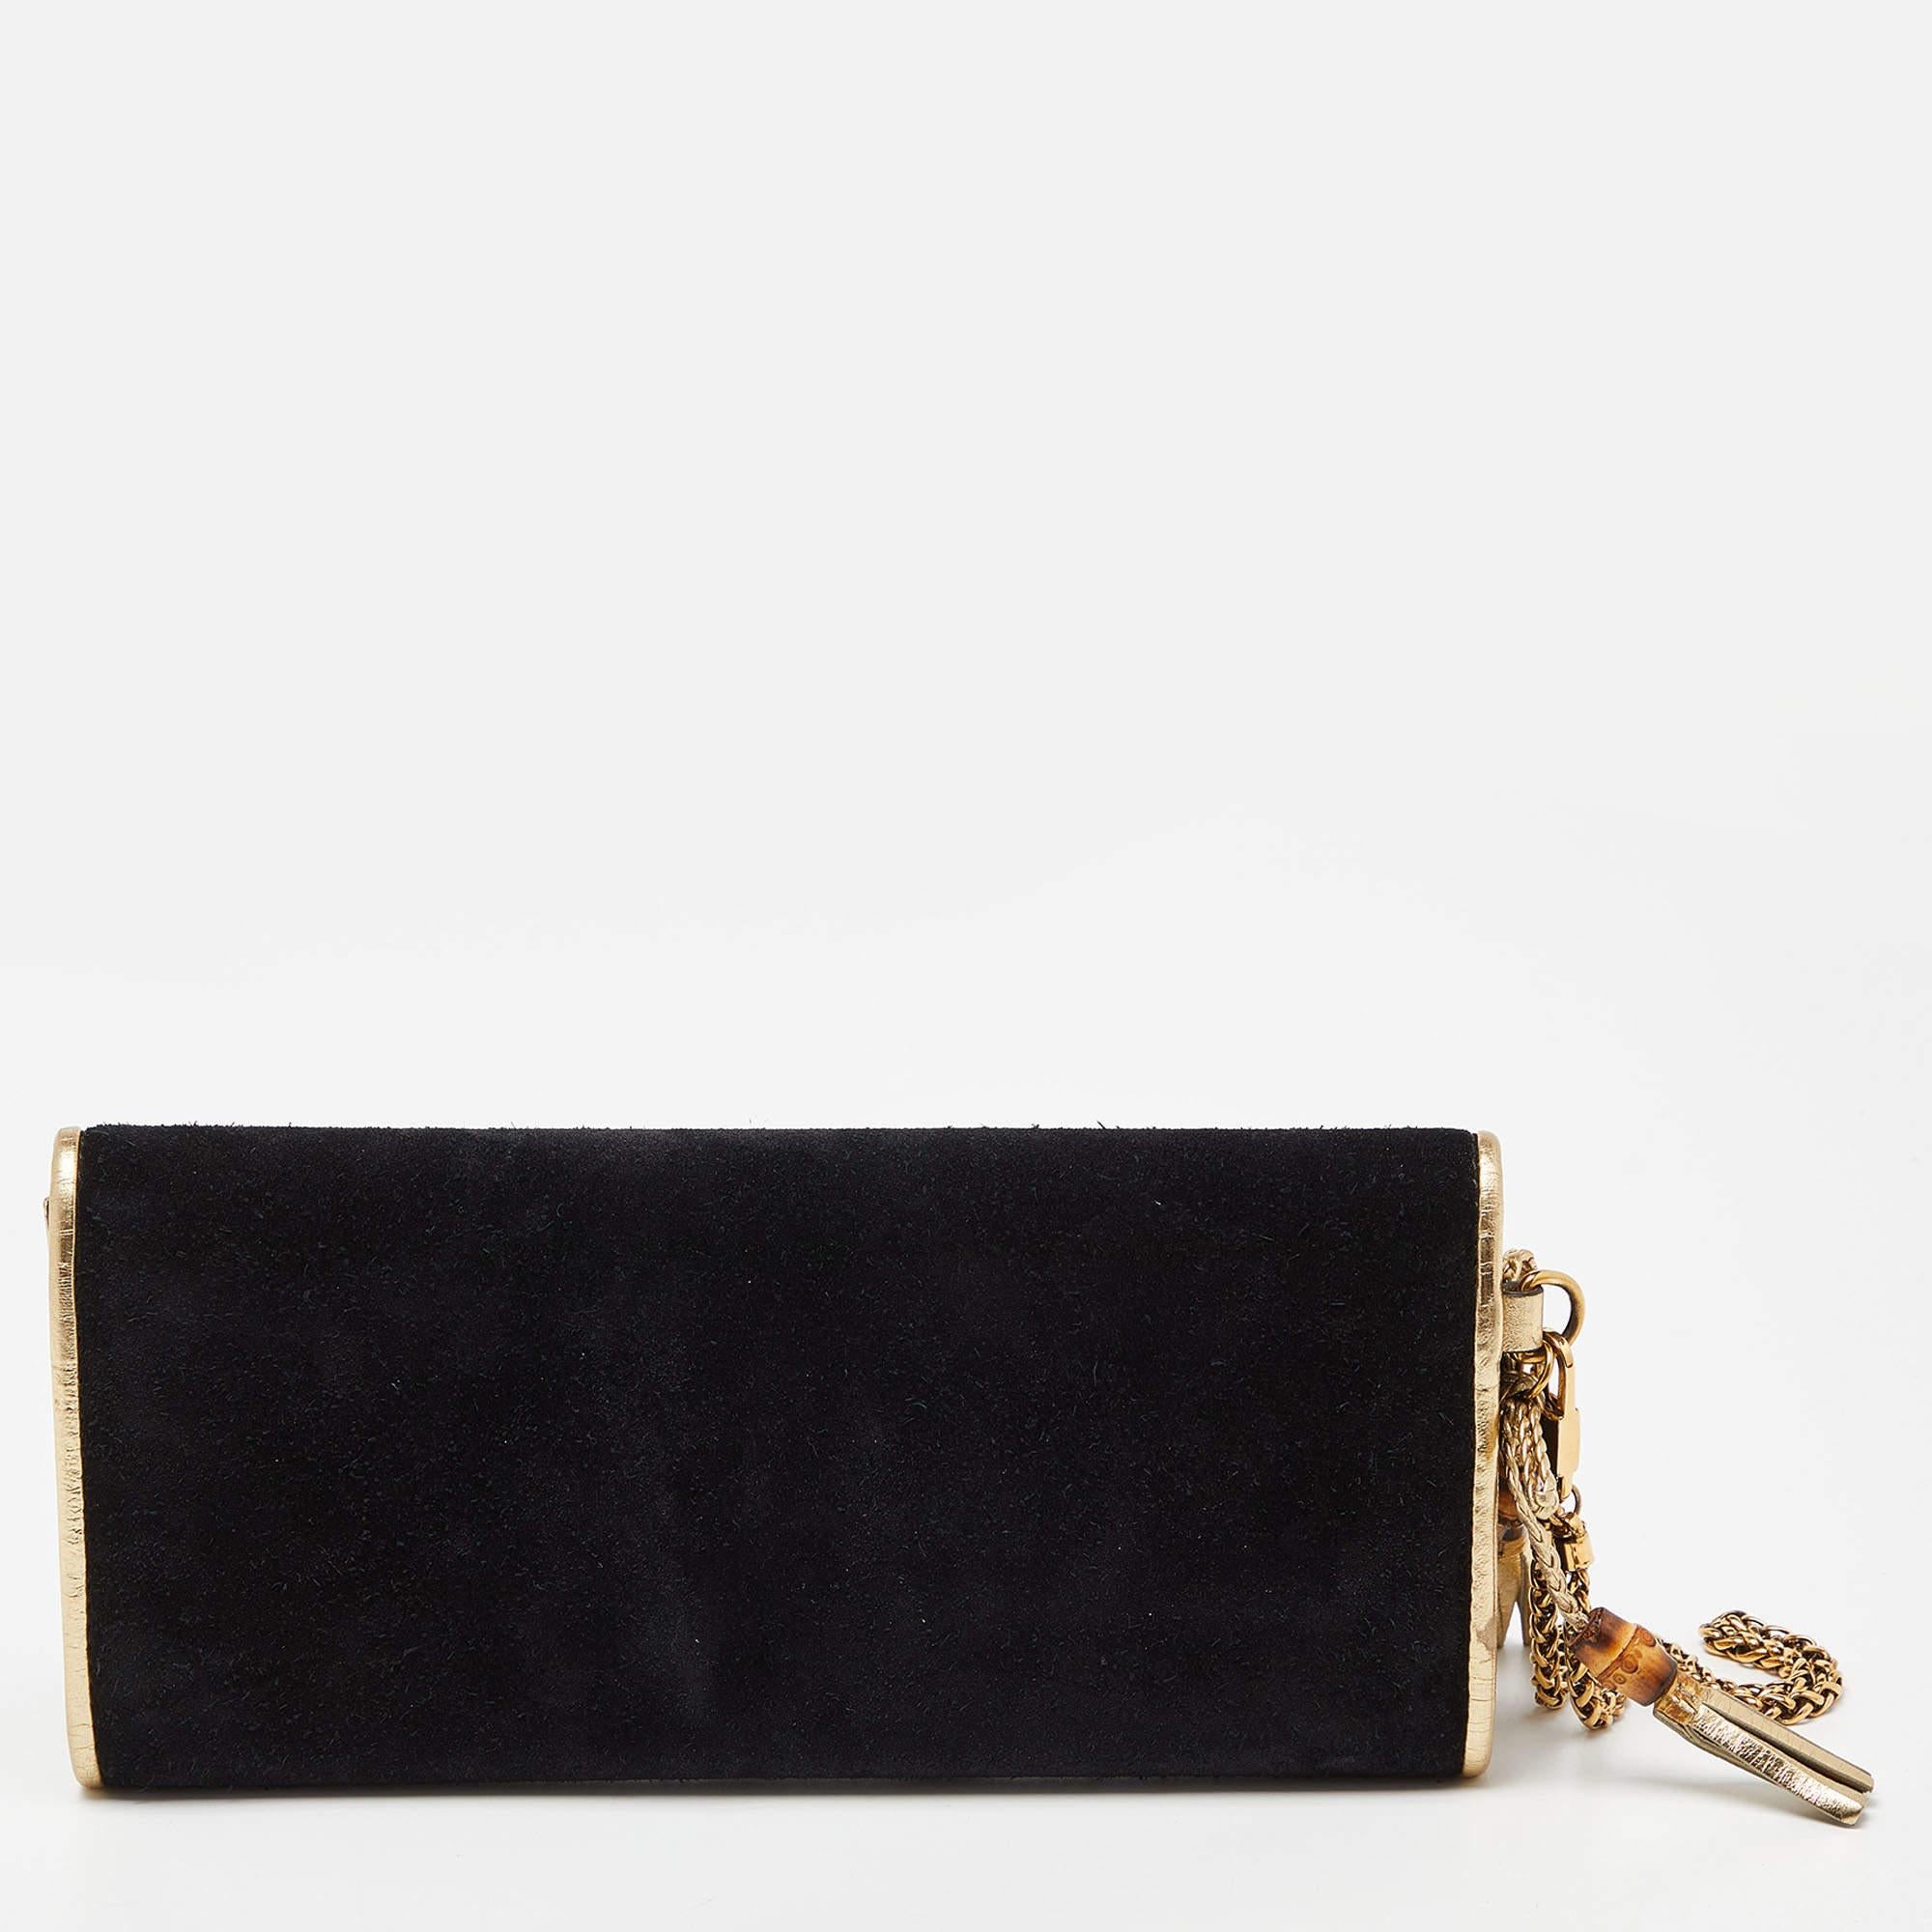 Women's Gucci Black/Gold Suede Bamboo Wristlet Clutch For Sale